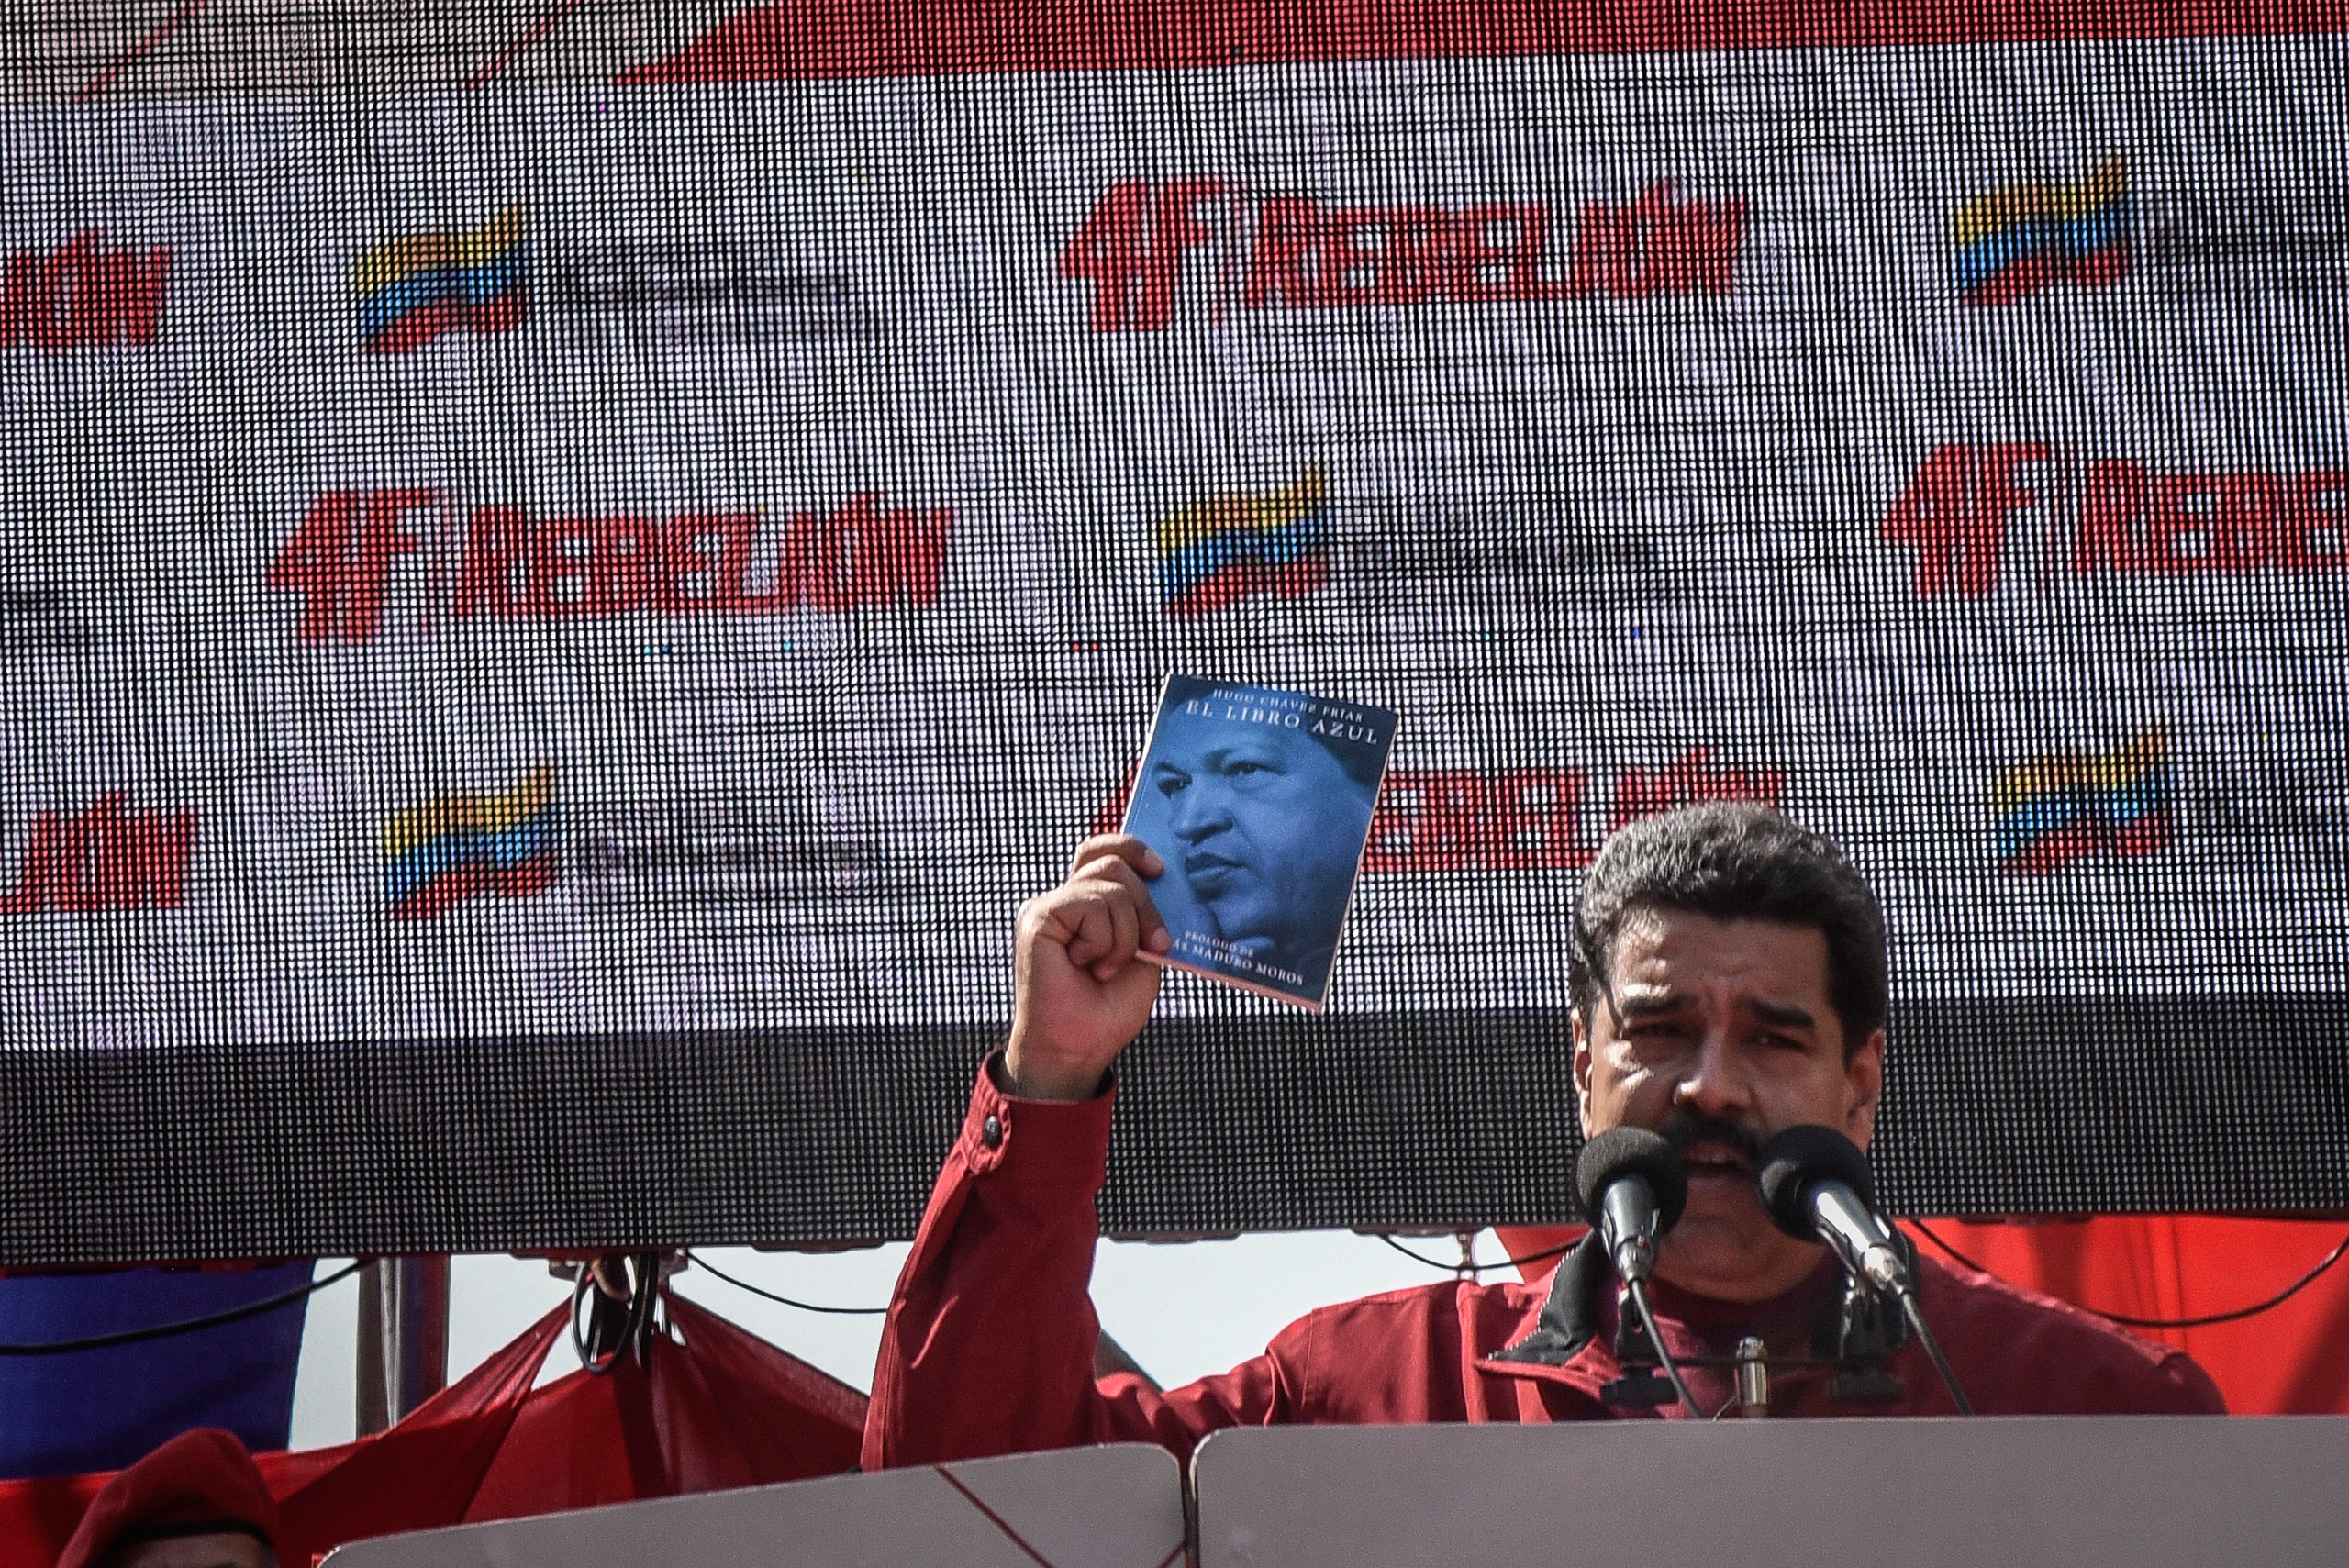 Venezuelan President Nicolás Maduro holds a copy of the El Libro Azul, or The Blue Book, written by his predecessor, Hugo Chávez, while speaking at a rally to commemorate the 24th anniversary of Chávez's failed military coup in Caracas, Venezuela, Feb. 4, 2016. (Carlos Becerra—Bloomberg/Getty Images)